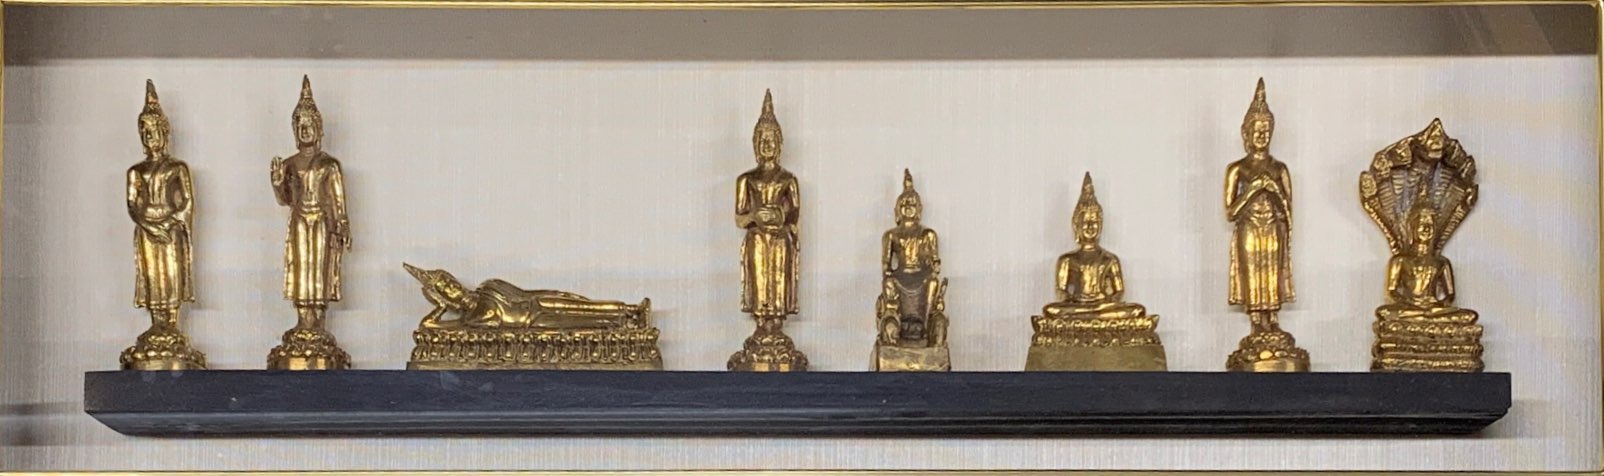 A cased set of Thai Buddhist figures, frame size 74 x 39cm. - Image 2 of 2